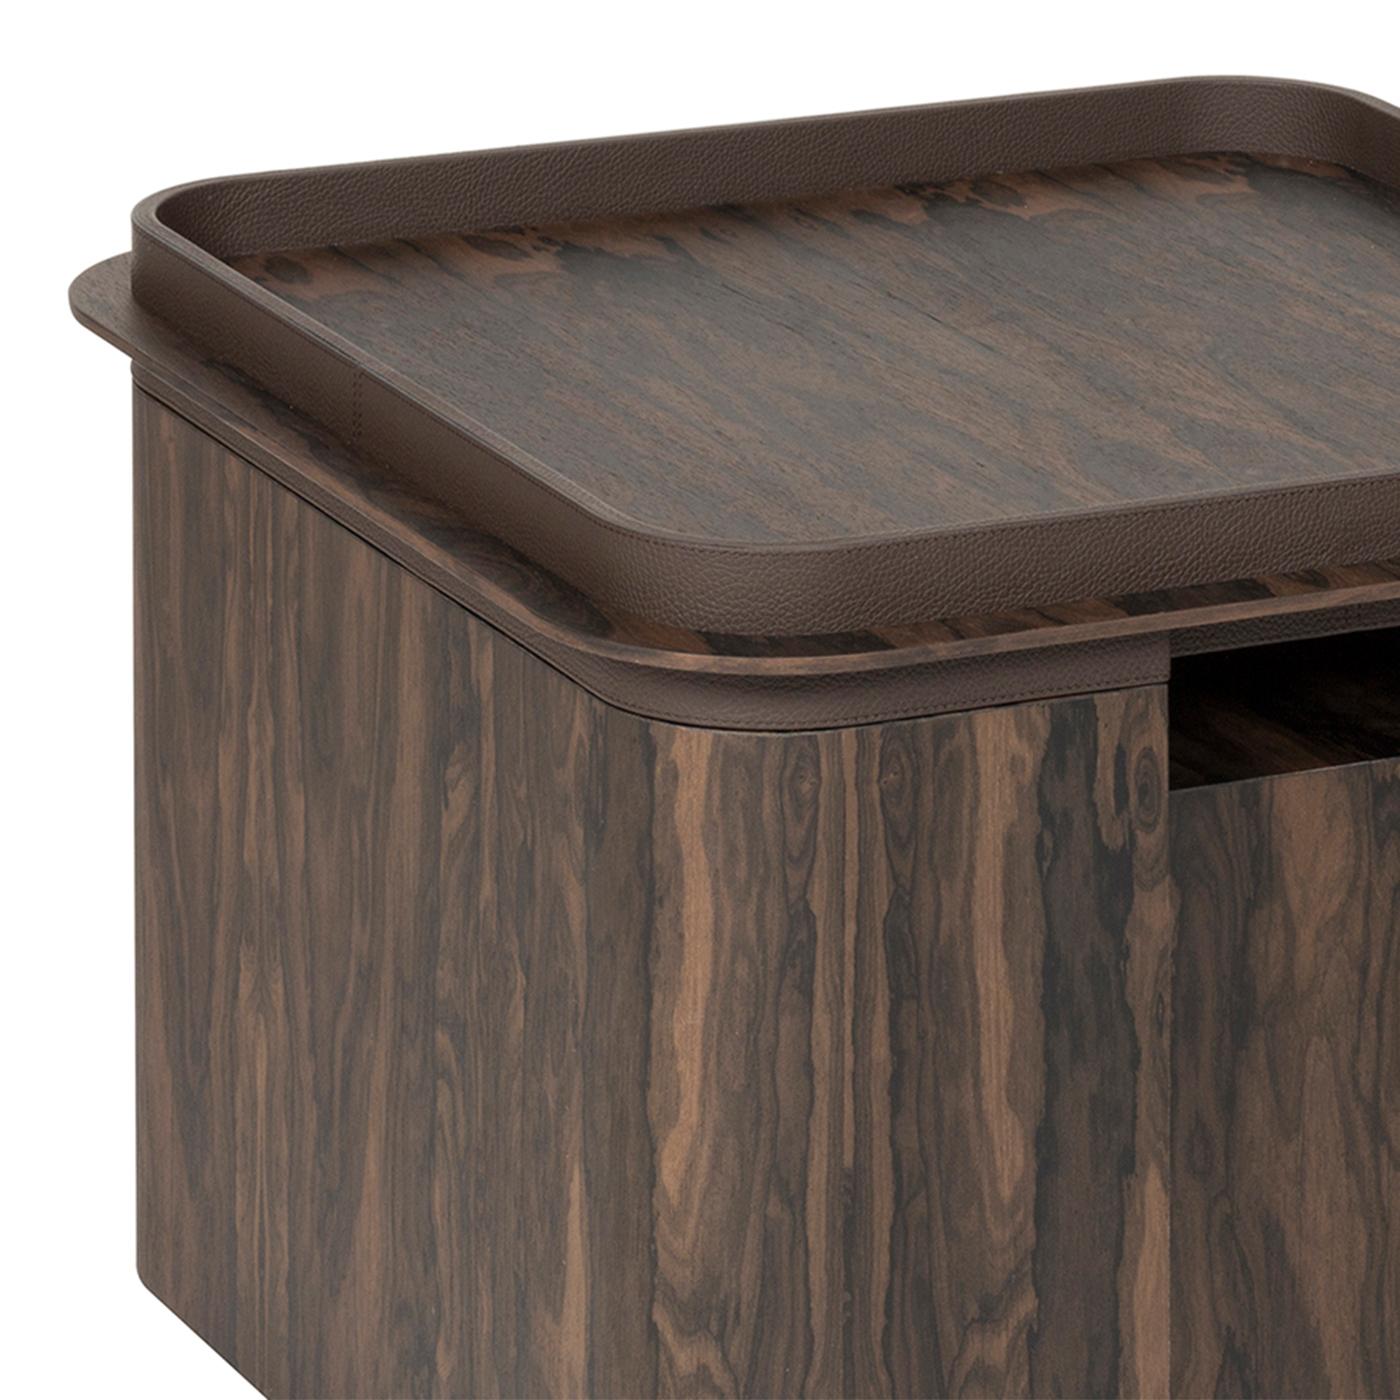 Side table walnut smart with structure
in solid walnut wood. With walnut top surrounded 
with genuine brown leather.